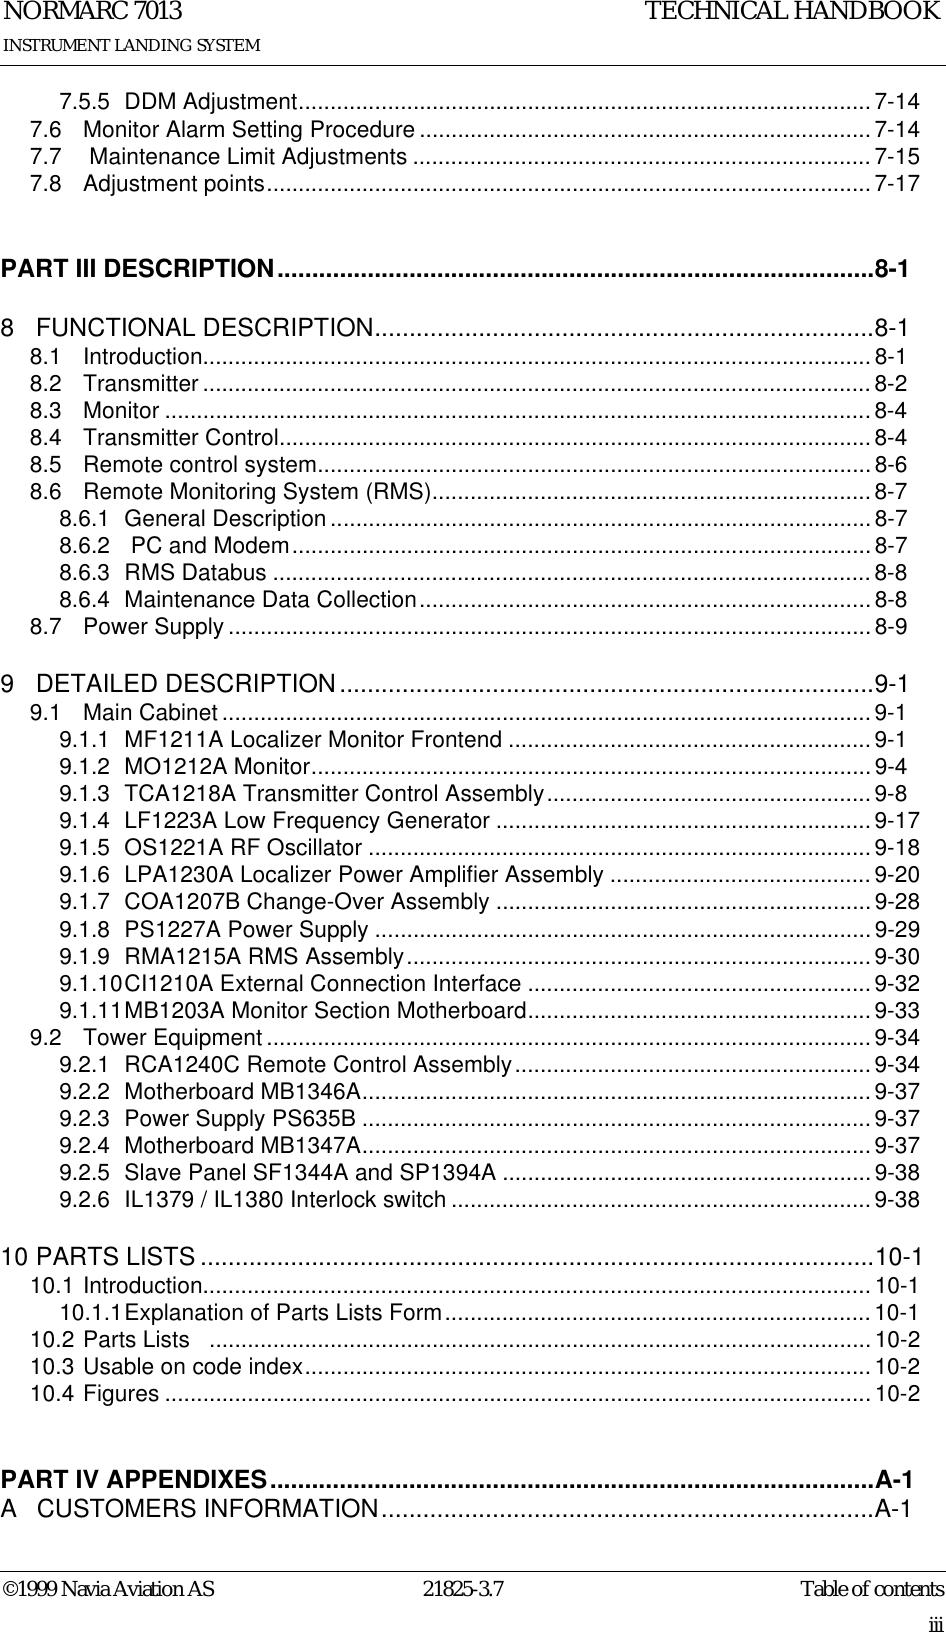 Table of contentsNORMARC 701321825-3.7iii©1999 Navia Aviation ASINSTRUMENT LANDING SYSTEMTECHNICAL HANDBOOK7.5.5 DDM Adjustment.......................................................................................... 7-147.6 Monitor Alarm Setting Procedure.......................................................................7-147.7  Maintenance Limit Adjustments ........................................................................7-157.8 Adjustment points............................................................................................... 7-17PART III DESCRIPTION......................................................................................8-18 FUNCTIONAL DESCRIPTION........................................................................8-18.1 Introduction......................................................................................................... 8-18.2 Transmitter ......................................................................................................... 8-28.3 Monitor ............................................................................................................... 8-48.4 Transmitter Control............................................................................................. 8-48.5 Remote control system.......................................................................................8-68.6 Remote Monitoring System (RMS)..................................................................... 8-78.6.1 General Description ..................................................................................... 8-78.6.2  PC and Modem...........................................................................................8-78.6.3 RMS Databus .............................................................................................. 8-88.6.4 Maintenance Data Collection.......................................................................8-88.7 Power Supply .....................................................................................................8-99 DETAILED DESCRIPTION.............................................................................9-19.1 Main Cabinet ...................................................................................................... 9-19.1.1 MF1211A Localizer Monitor Frontend ......................................................... 9-19.1.2 MO1212A Monitor........................................................................................9-49.1.3 TCA1218A Transmitter Control Assembly...................................................9-89.1.4 LF1223A Low Frequency Generator ...........................................................9-179.1.5 OS1221A RF Oscillator ............................................................................... 9-189.1.6 LPA1230A Localizer Power Amplifier Assembly ......................................... 9-209.1.7 COA1207B Change-Over Assembly ...........................................................9-289.1.8 PS1227A Power Supply ..............................................................................9-299.1.9 RMA1215A RMS Assembly.........................................................................9-309.1.10CI1210A External Connection Interface ......................................................9-329.1.11MB1203A Monitor Section Motherboard......................................................9-339.2 Tower Equipment ............................................................................................... 9-349.2.1 RCA1240C Remote Control Assembly........................................................ 9-349.2.2 Motherboard MB1346A................................................................................9-379.2.3 Power Supply PS635B ................................................................................9-379.2.4 Motherboard MB1347A................................................................................9-379.2.5 Slave Panel SF1344A and SP1394A ..........................................................9-389.2.6 IL1379 / IL1380 Interlock switch ..................................................................9-3810 PARTS LISTS .................................................................................................10-110.1 Introduction......................................................................................................... 10-110.1.1Explanation of Parts Lists Form................................................................... 10-110.2 Parts Lists   ........................................................................................................ 10-210.3 Usable on code index.........................................................................................10-210.4 Figures ............................................................................................................... 10-2PART IV APPENDIXES.......................................................................................A-1A  CUSTOMERS INFORMATION.......................................................................A-1